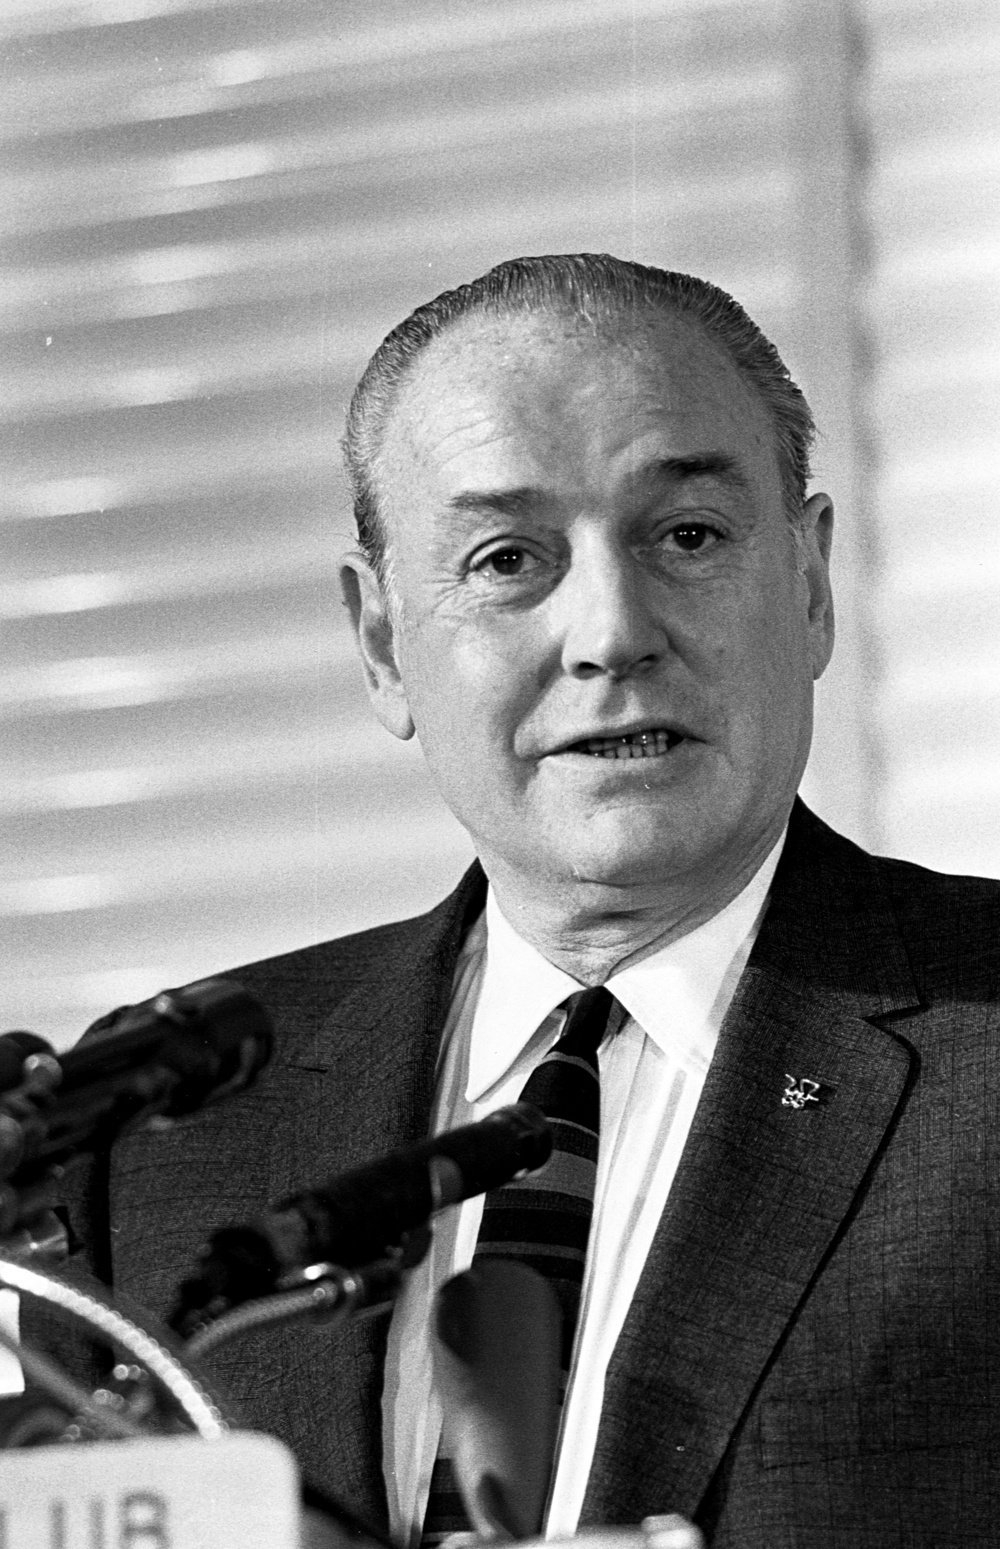 Winthrop Rockefeller, son of John D. Rockefeller, Jr., was an American governor and philanthropist. He served as a director of the Rockefeller Brothers Fund, and was a Republican governor of Arkansas from 1967-1971. (Photo by © CORBIS/Corbis via Getty Images)